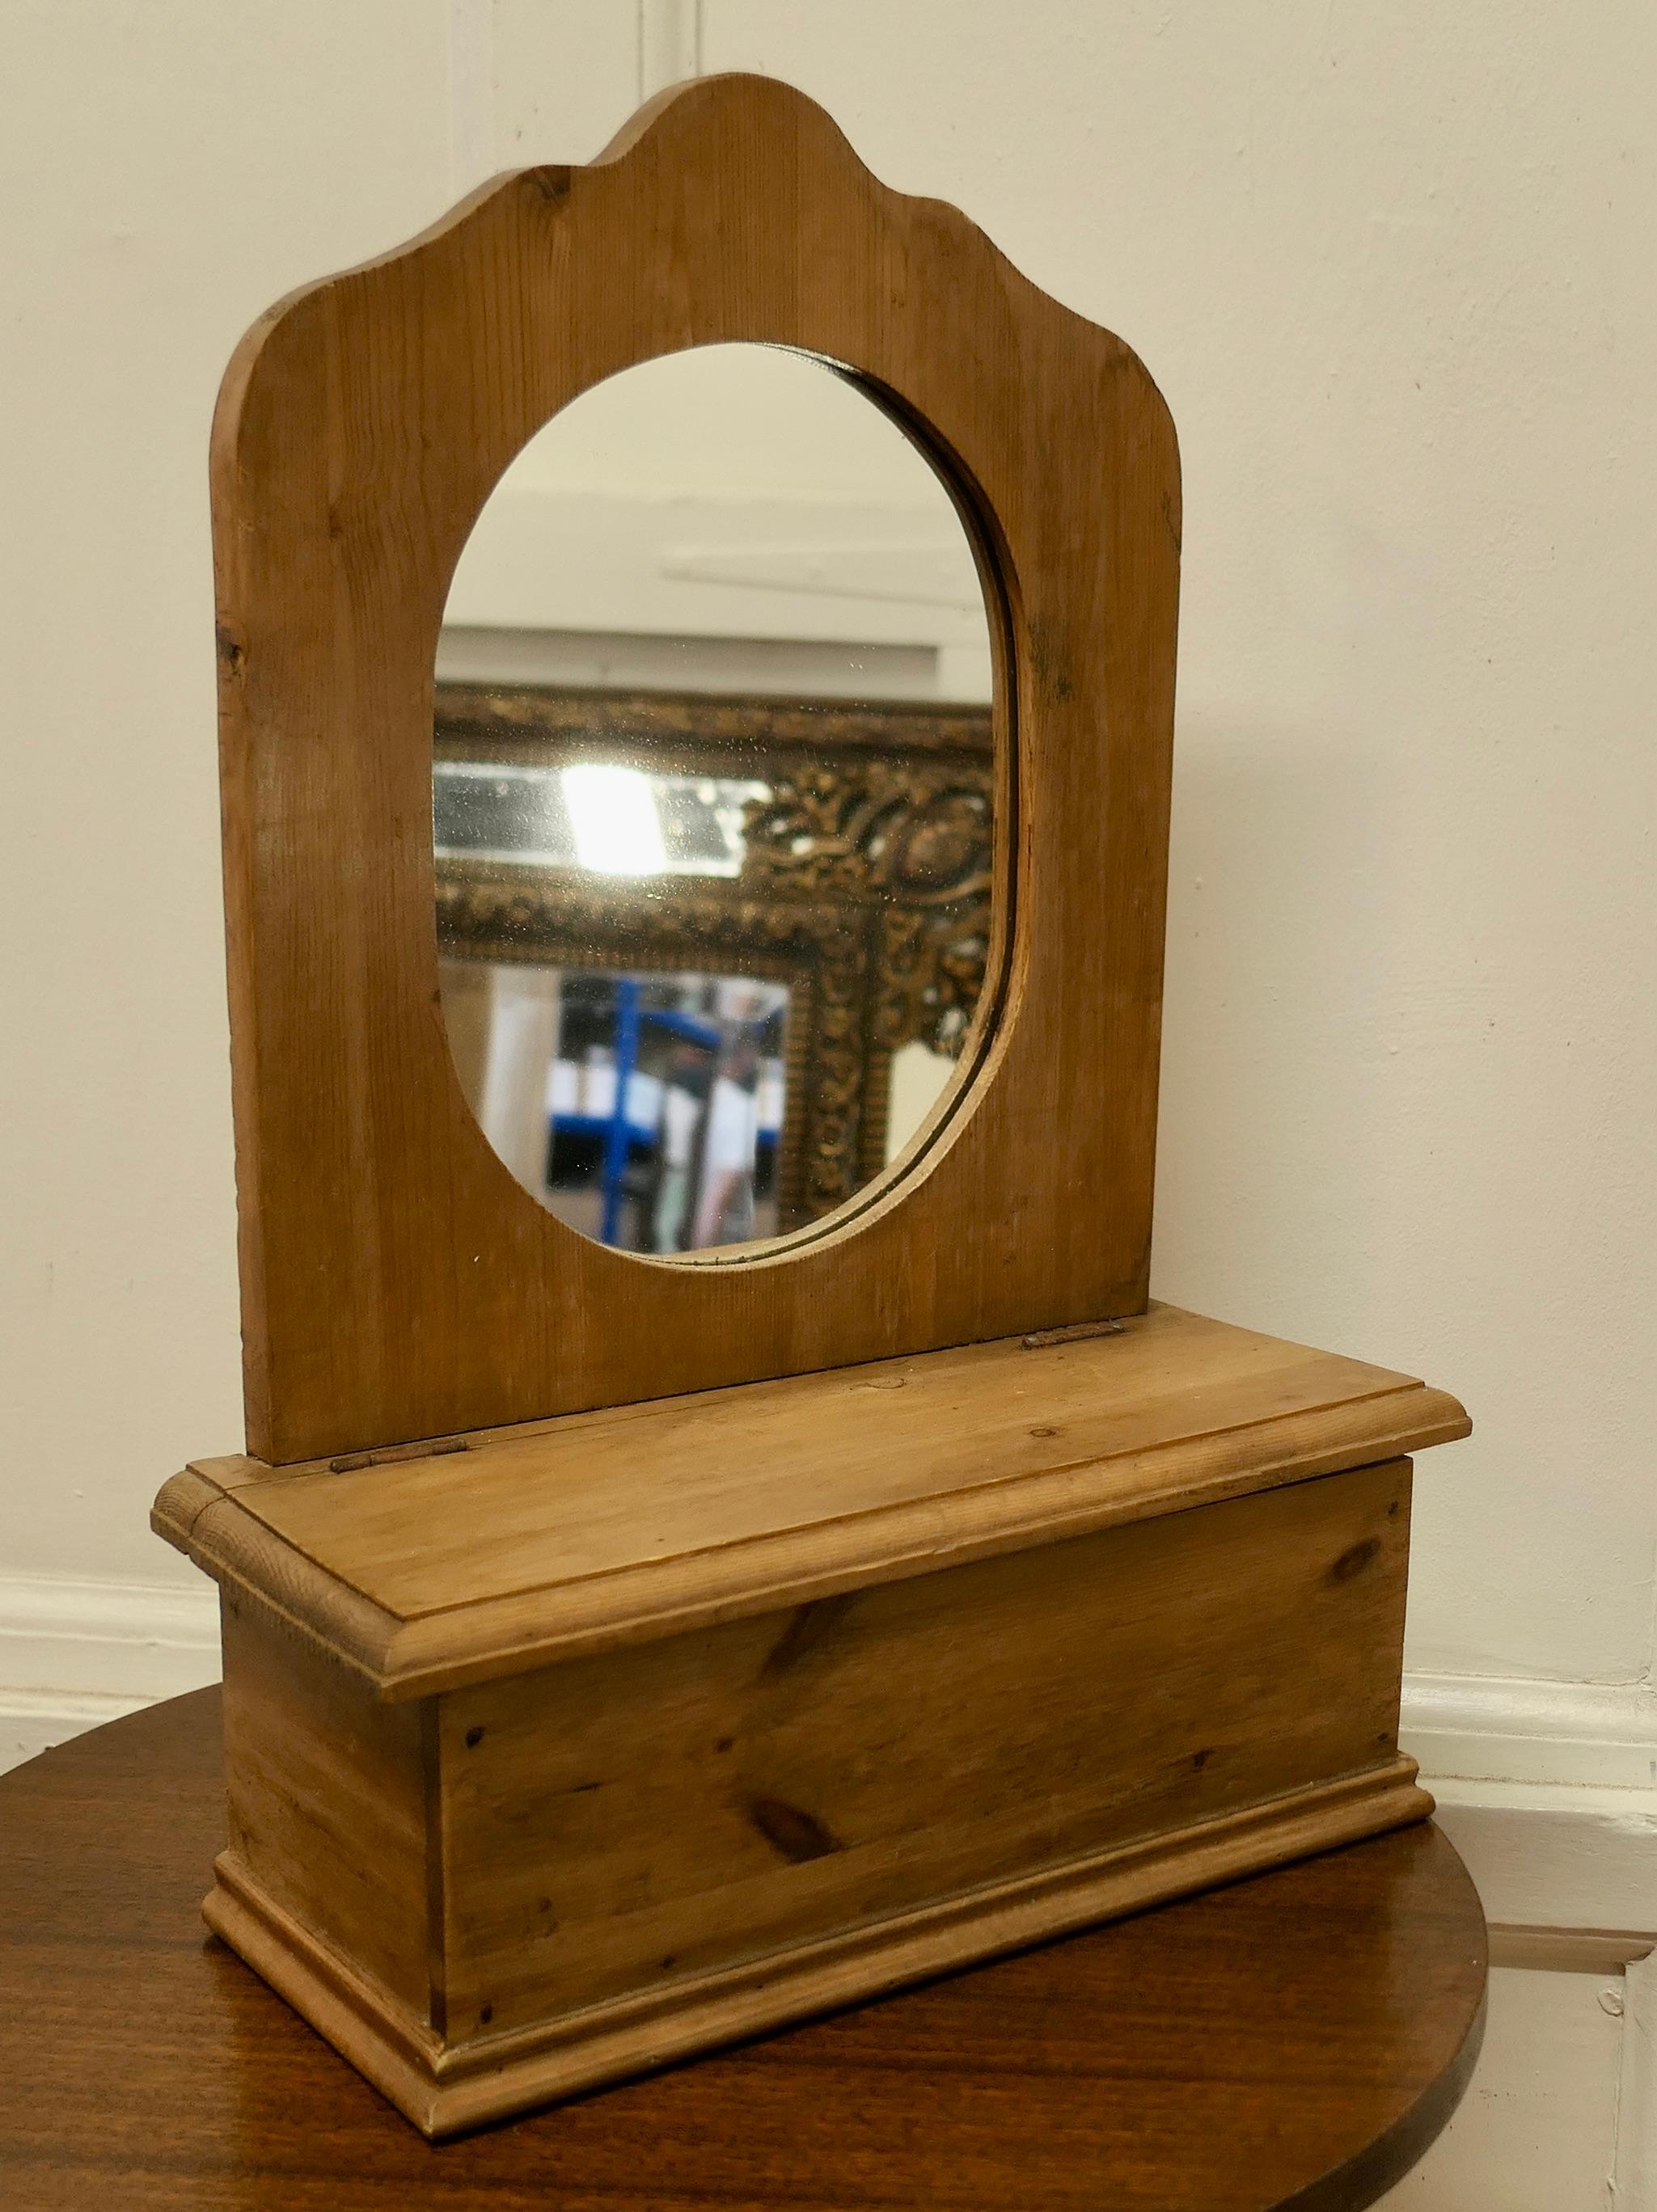 Pine toilet or vanity mirror
 
The mirror back has as scallop shape surrounding and Oval glass
Beneath there is a useful compartment with a lifting lid
The mirror is 14” wide and 6” deep, it is 20”high
THM166.